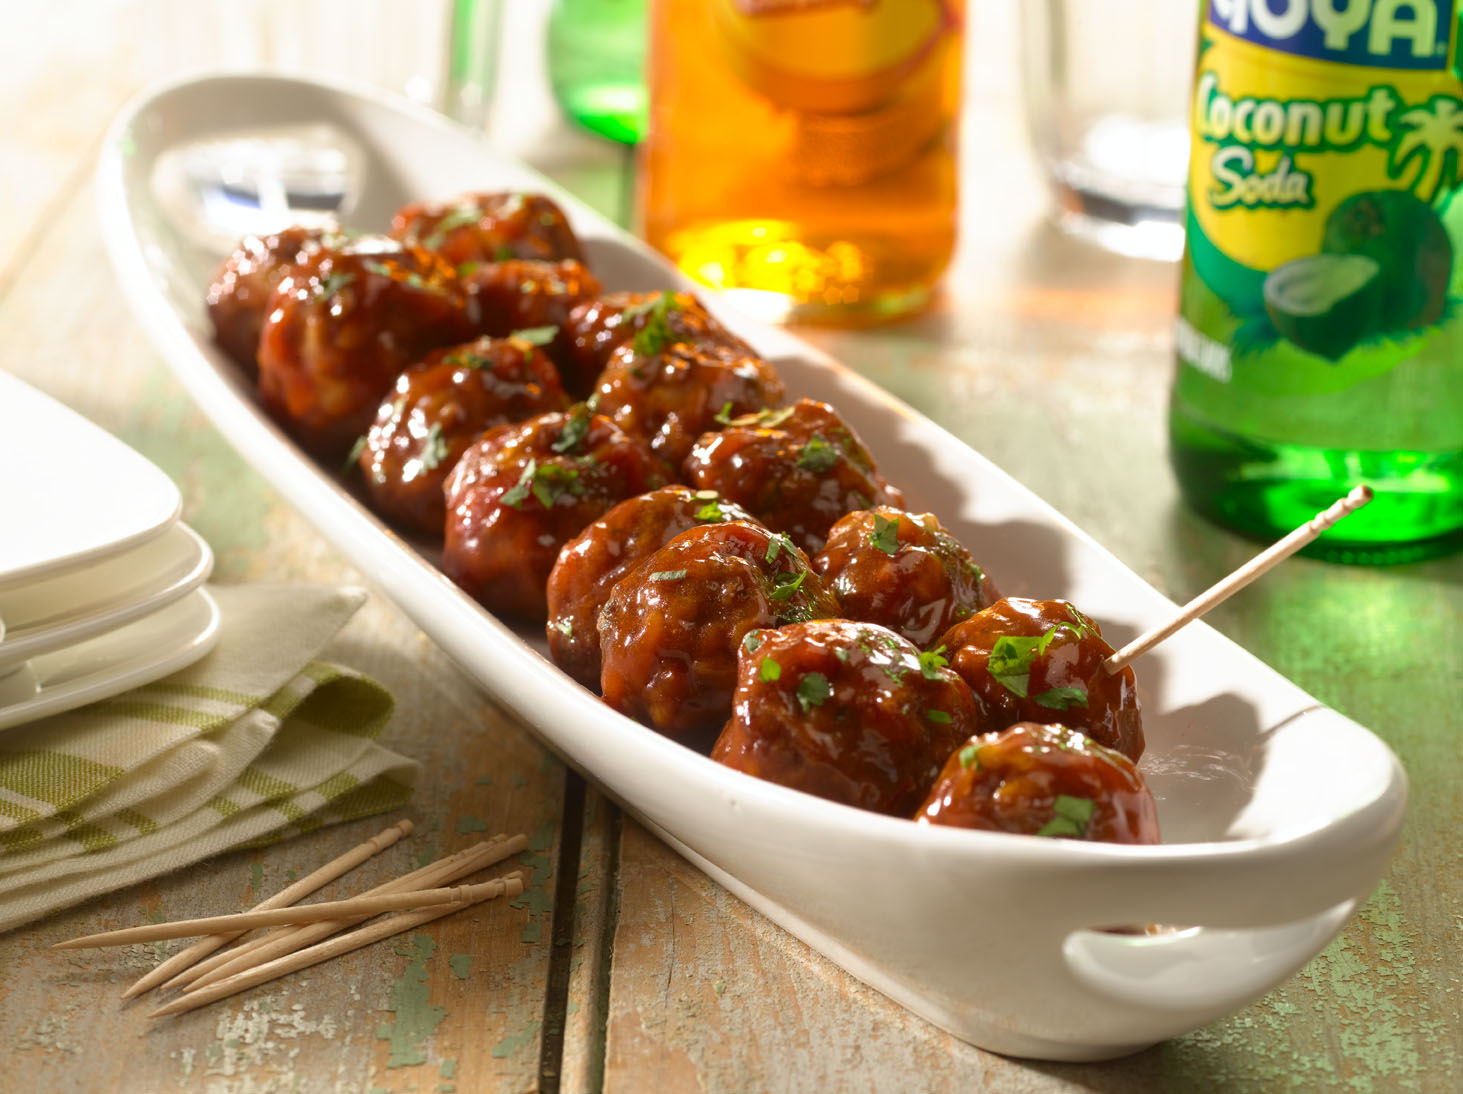 Beef and Bacon Cocktail Meatballs